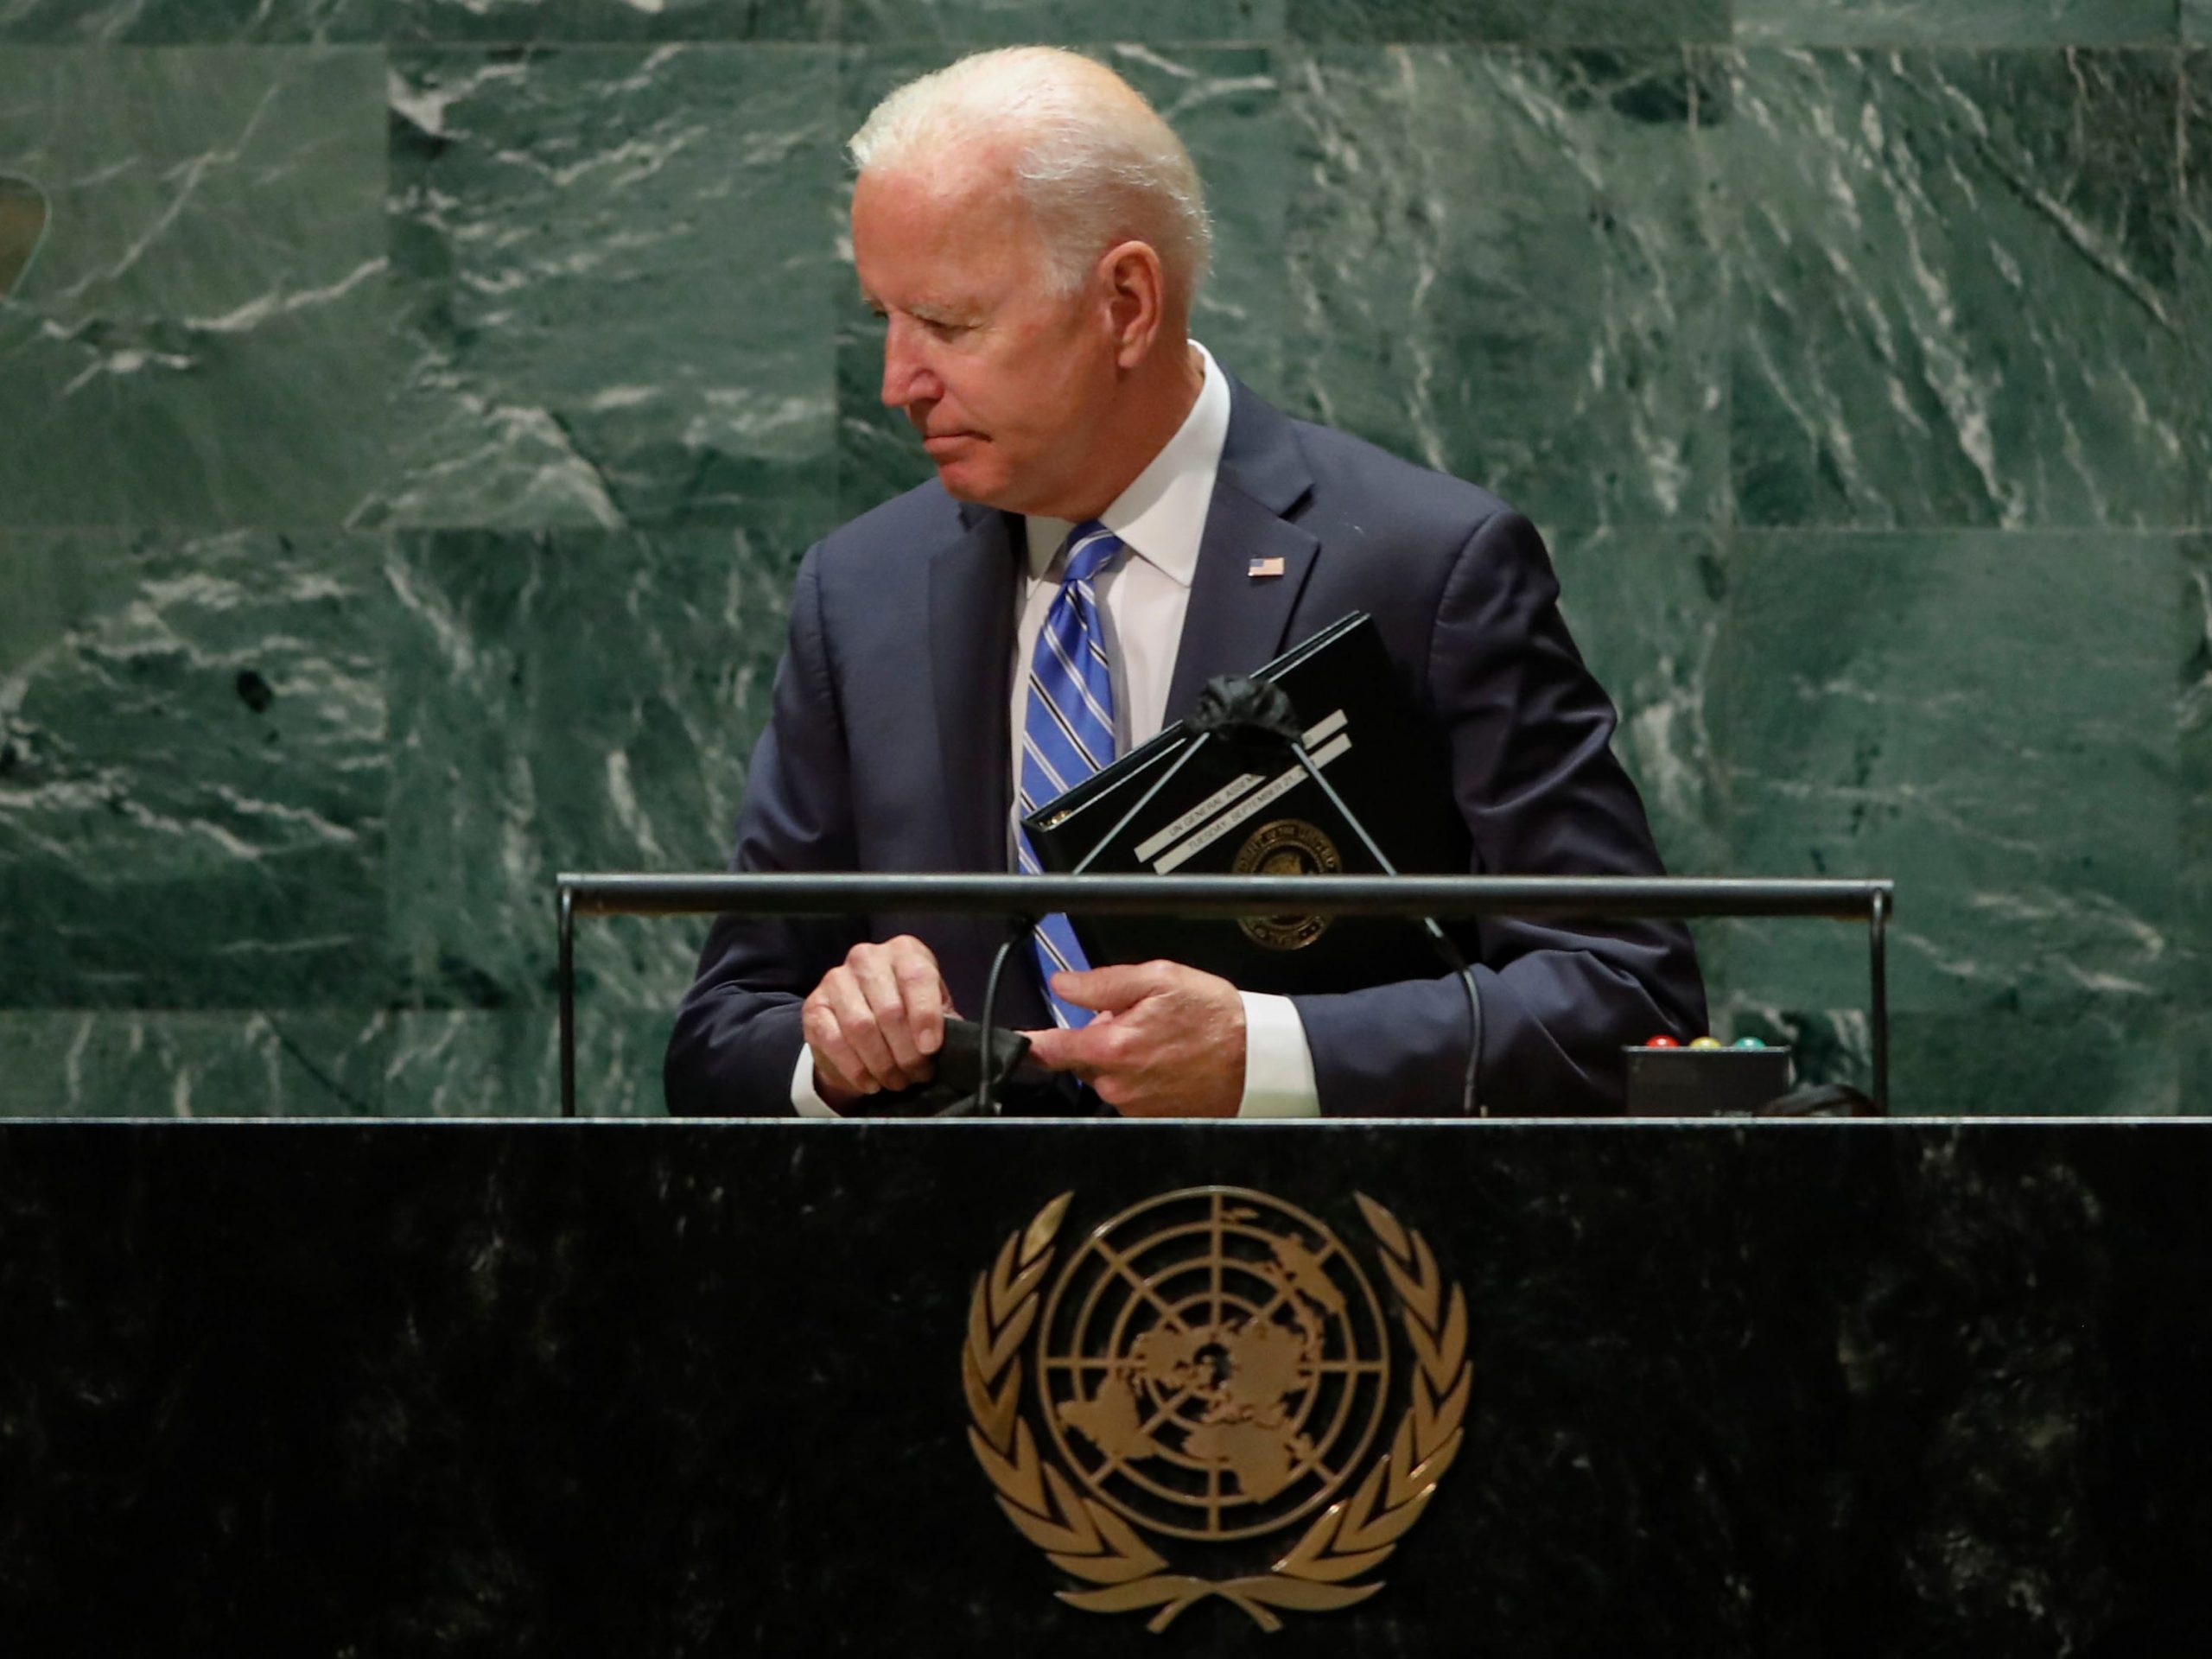 President Joe Biden concludes his address to the 76th Session of the UN General Assembly on September 21, 2021 in New York City.